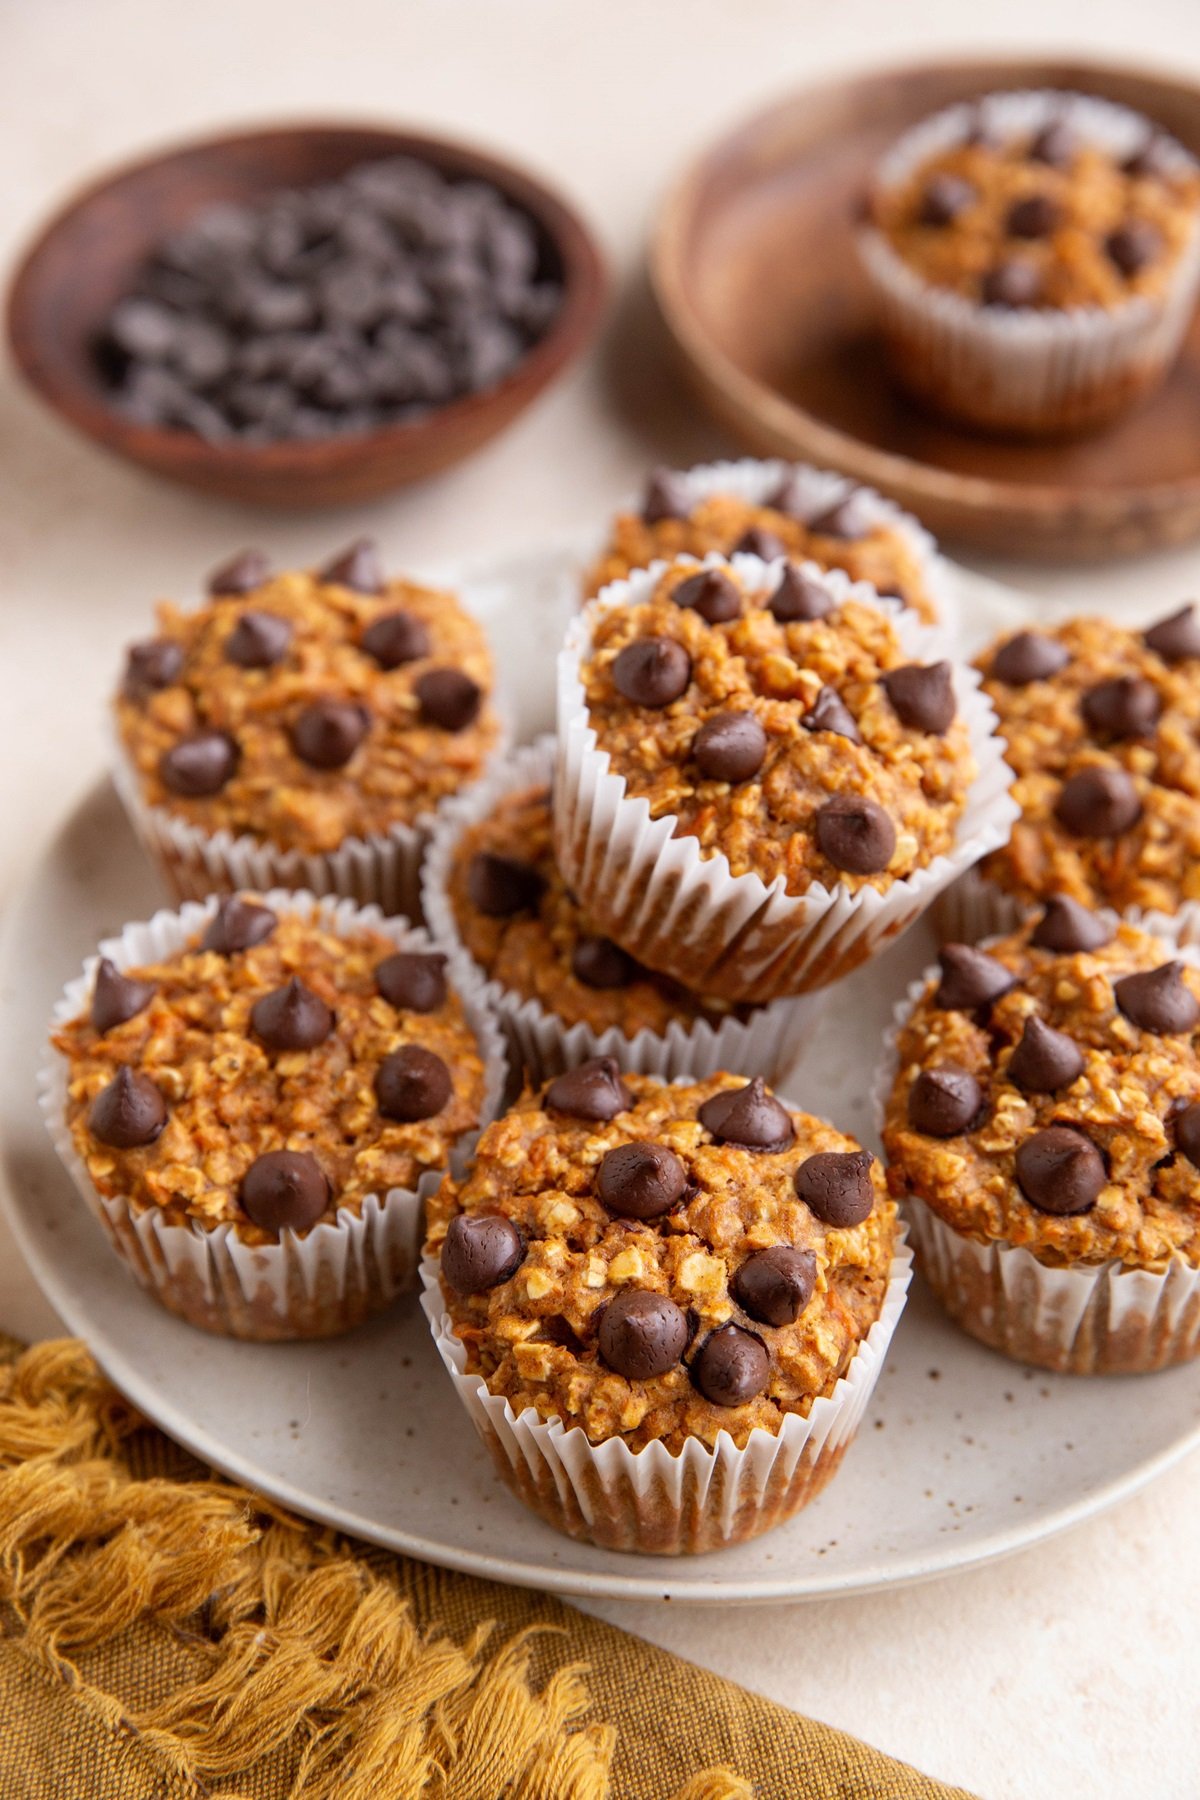 Plate of sweet potato oatmeal muffins with chocolate chips on top, ready to eat.